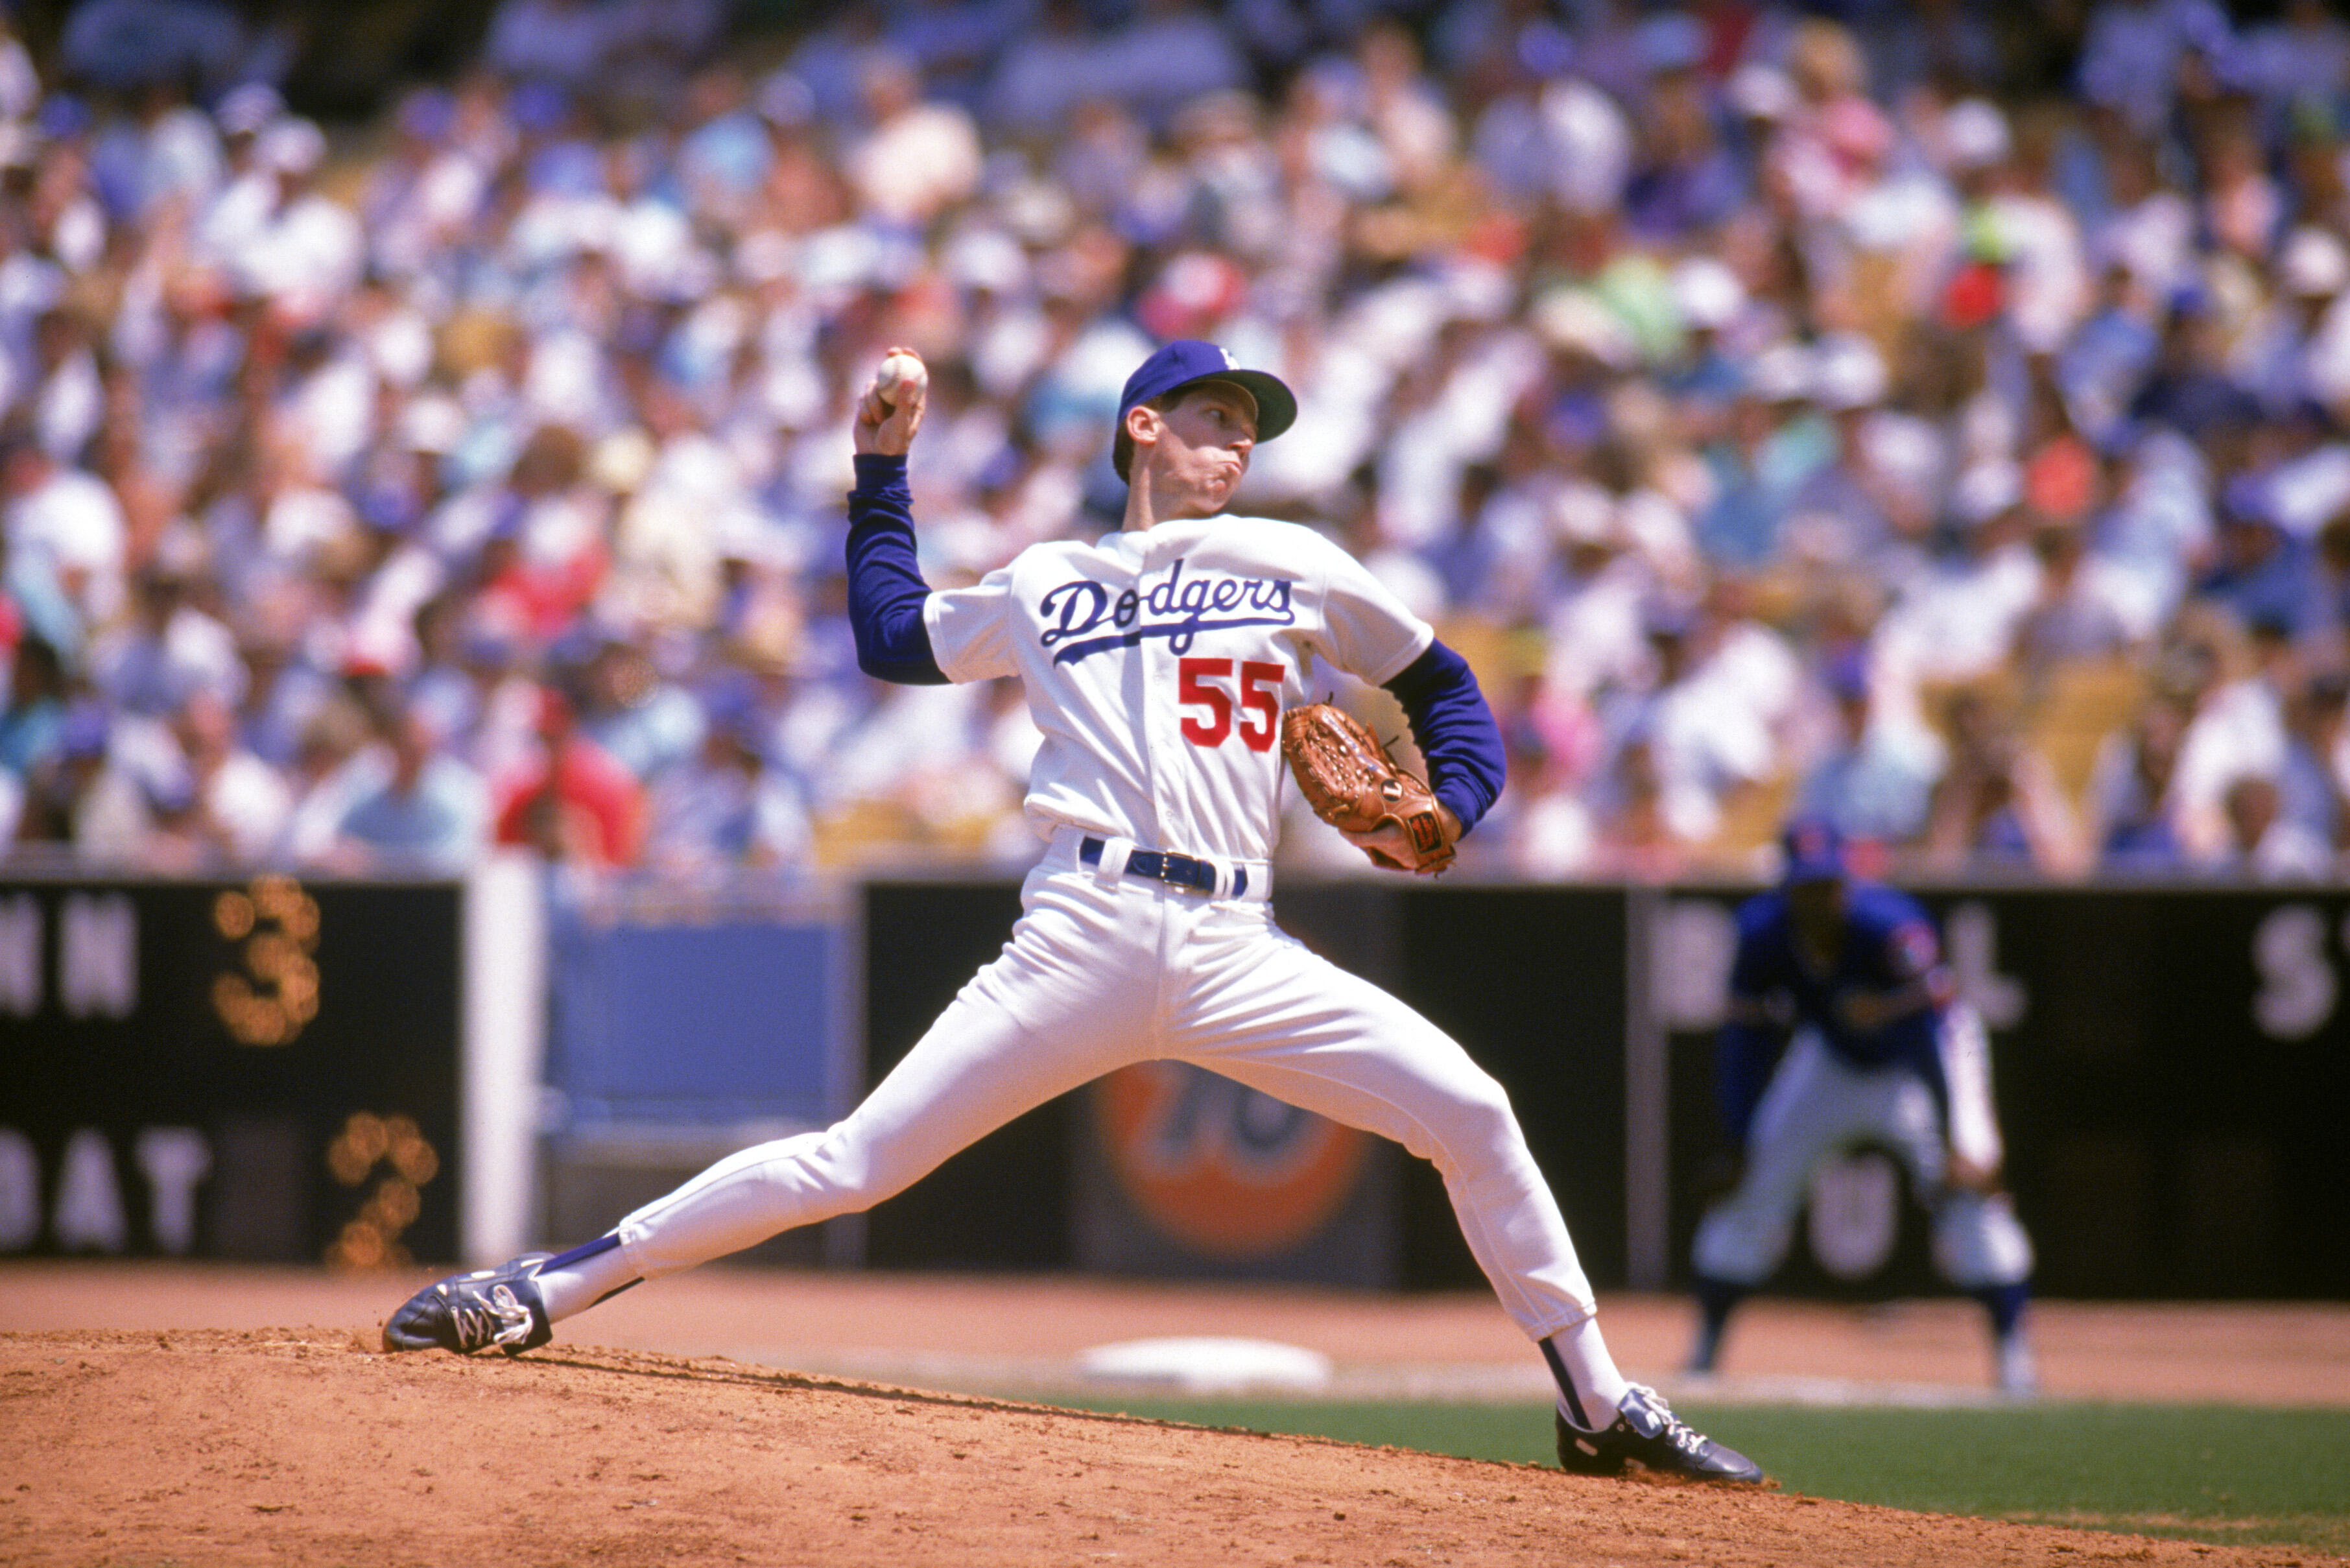 LOS ANGELES - 1989:  Orel Hershiser #55 of the Los Angeles Dodgers pitches against the Chicago Cubs in the 1989 season at Dodger Stadium in Los Angeles, California. (Photo by Mike Powell/Getty Images)